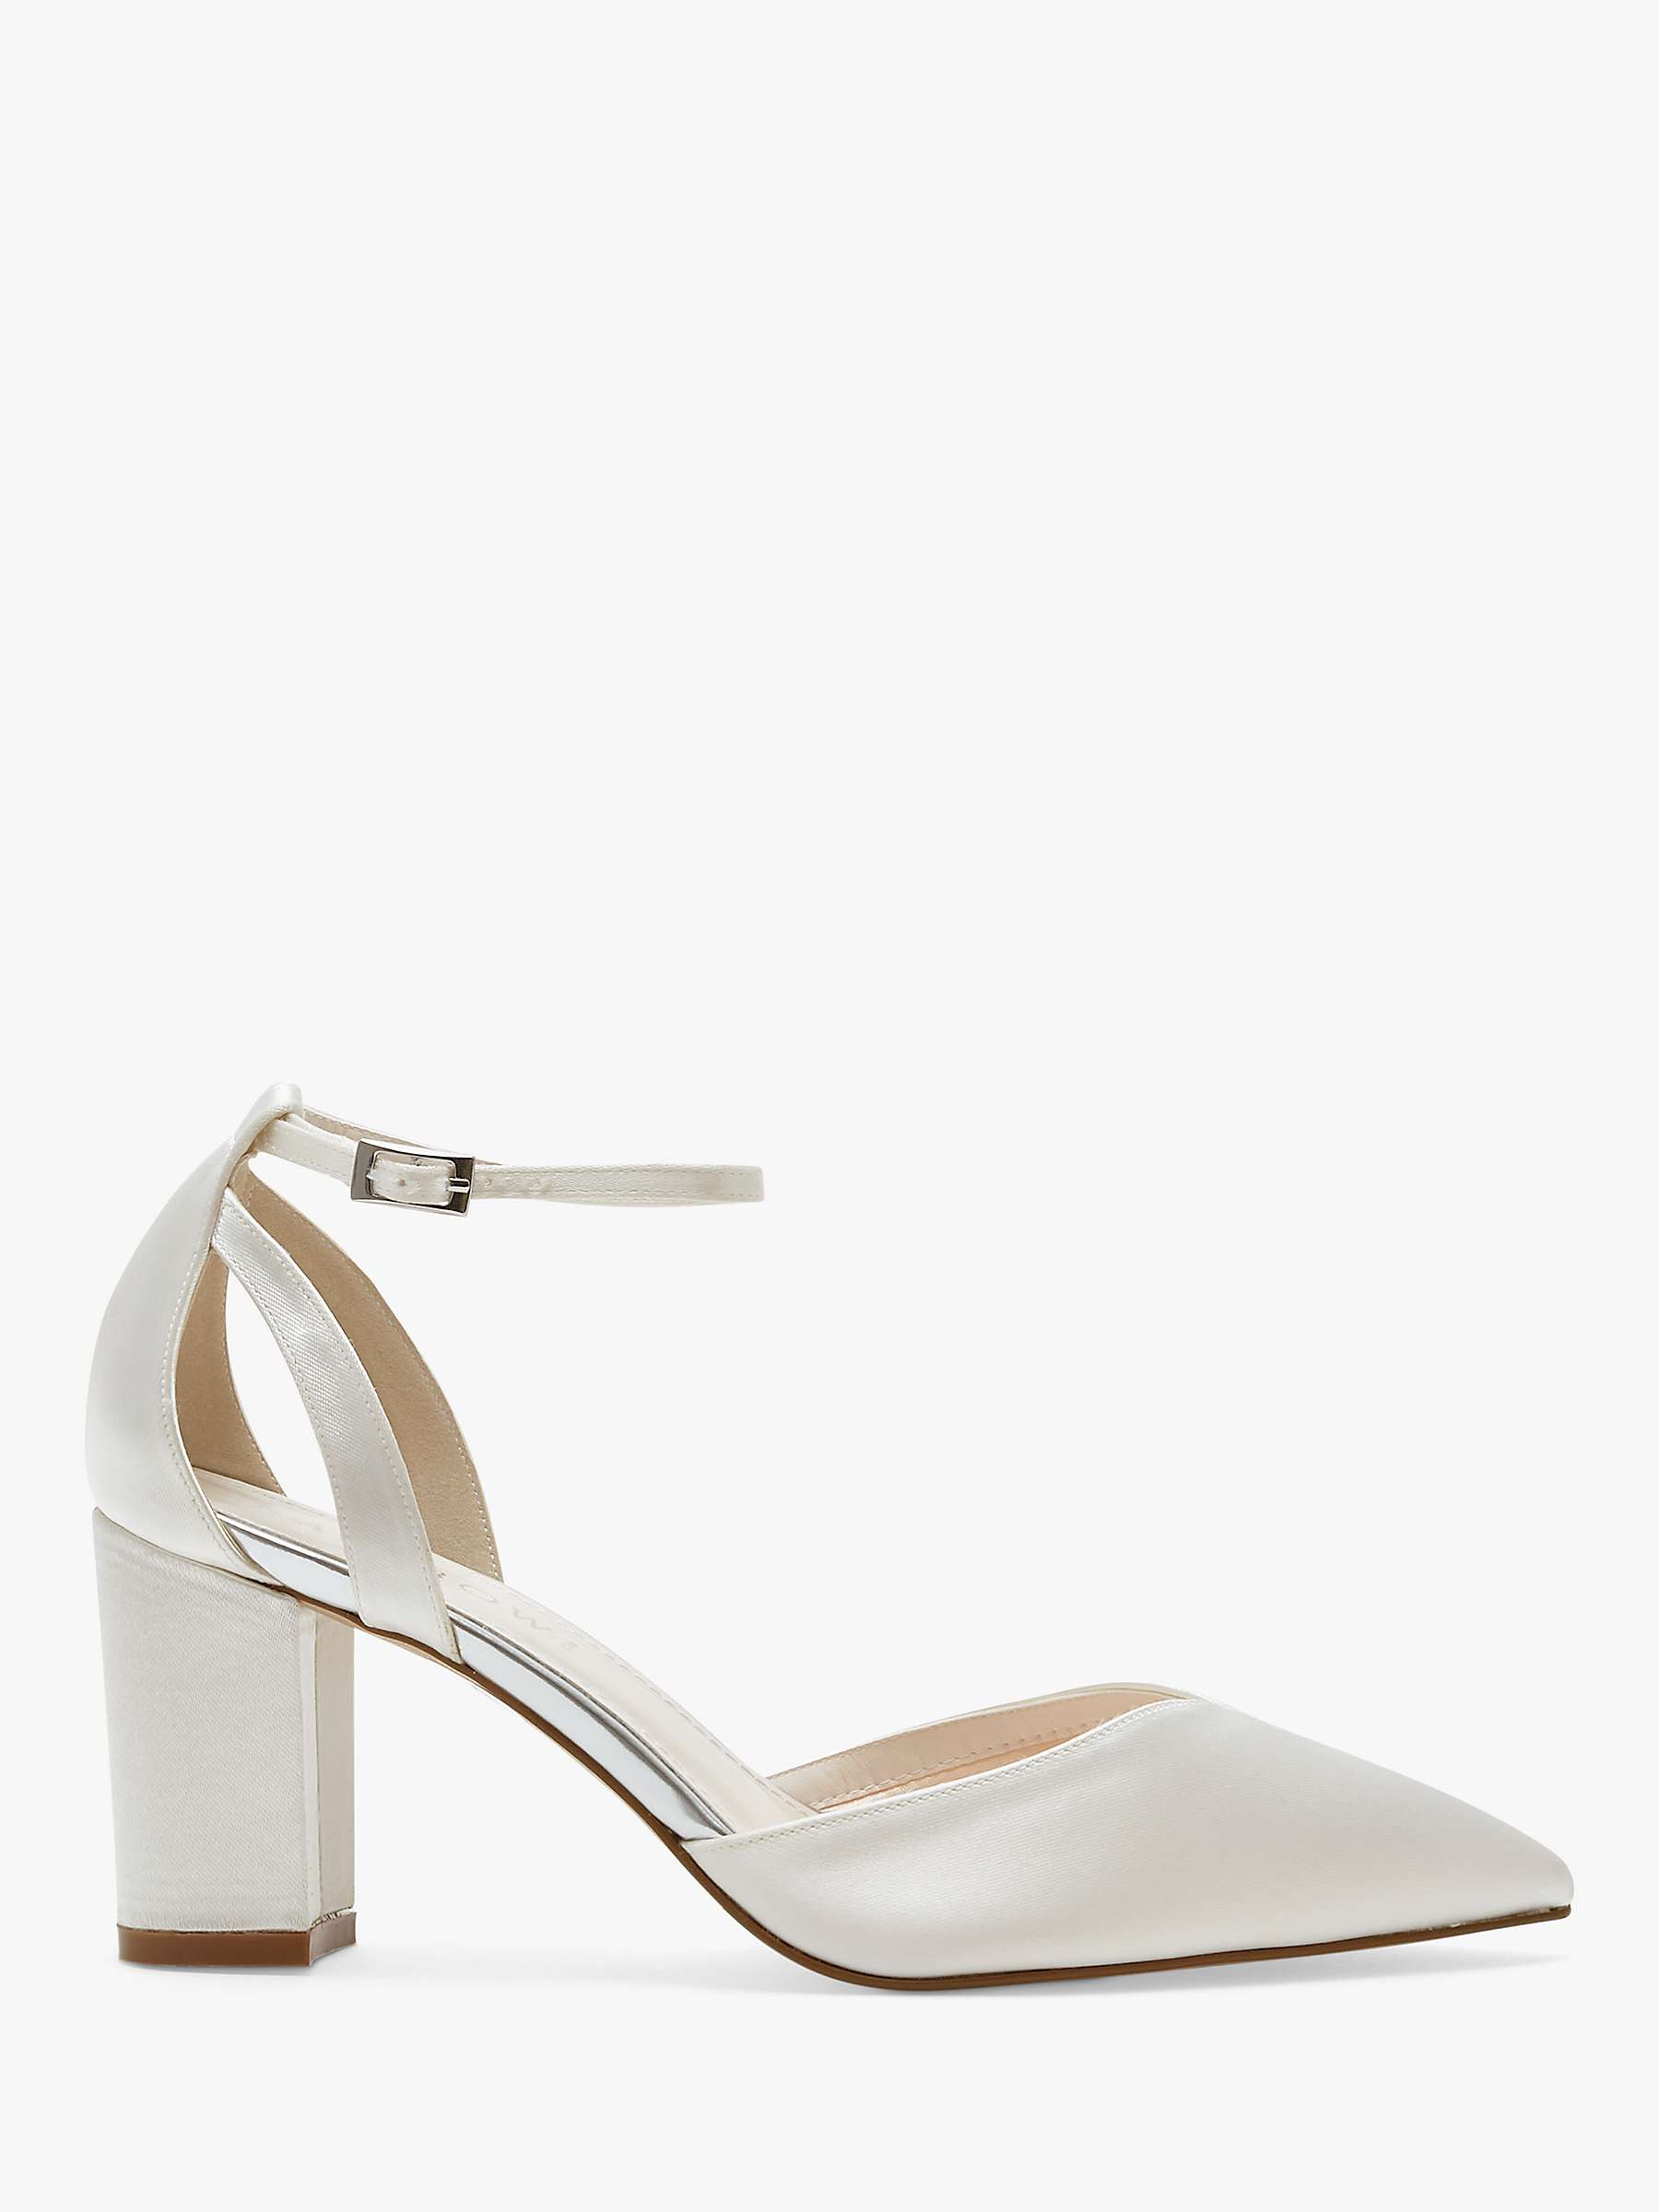 Buy Rainbow Club Bella Wide Fit Wedding Shoes, Ivory Satin Online at johnlewis.com